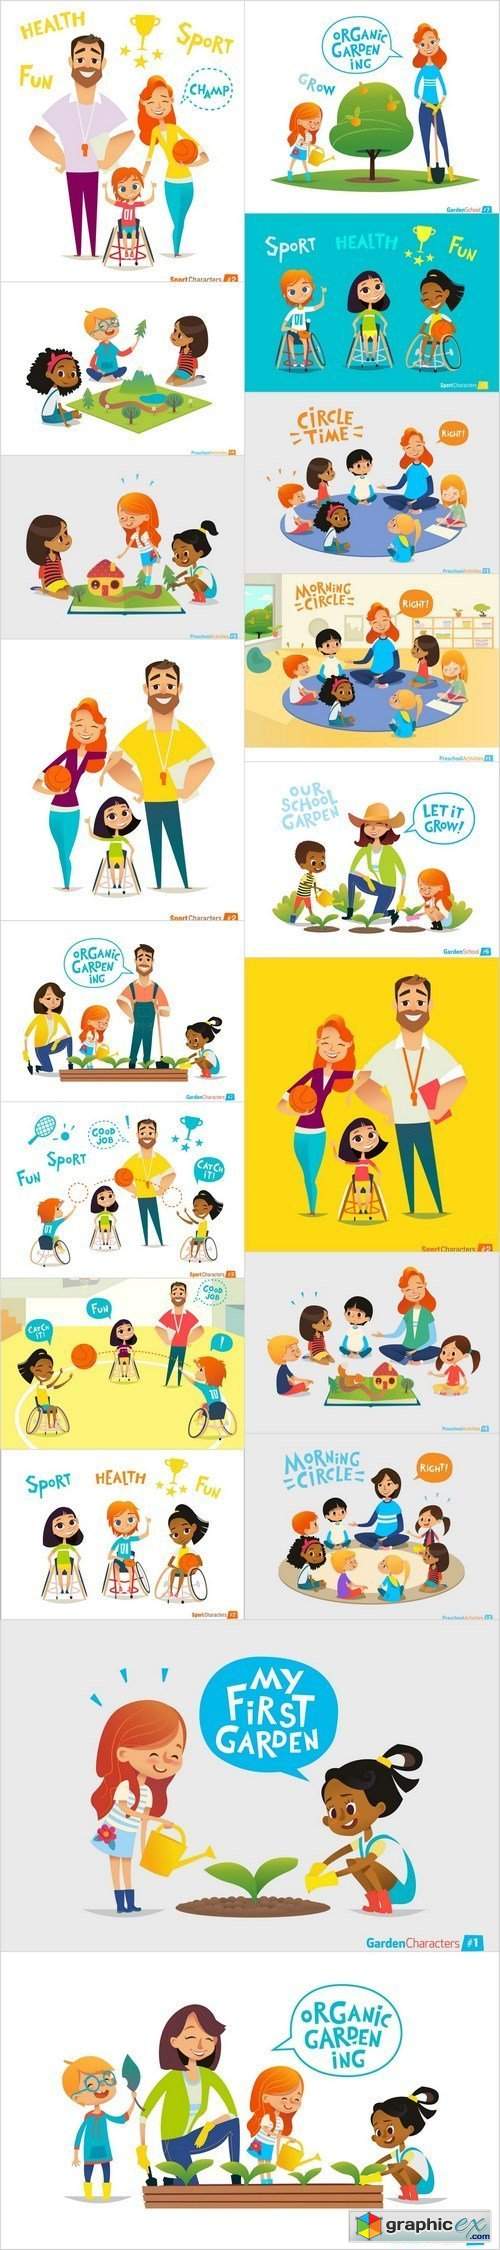  Cartoon people and Physical disability - social project - Set of 18xEPS Professional Vector Stock 